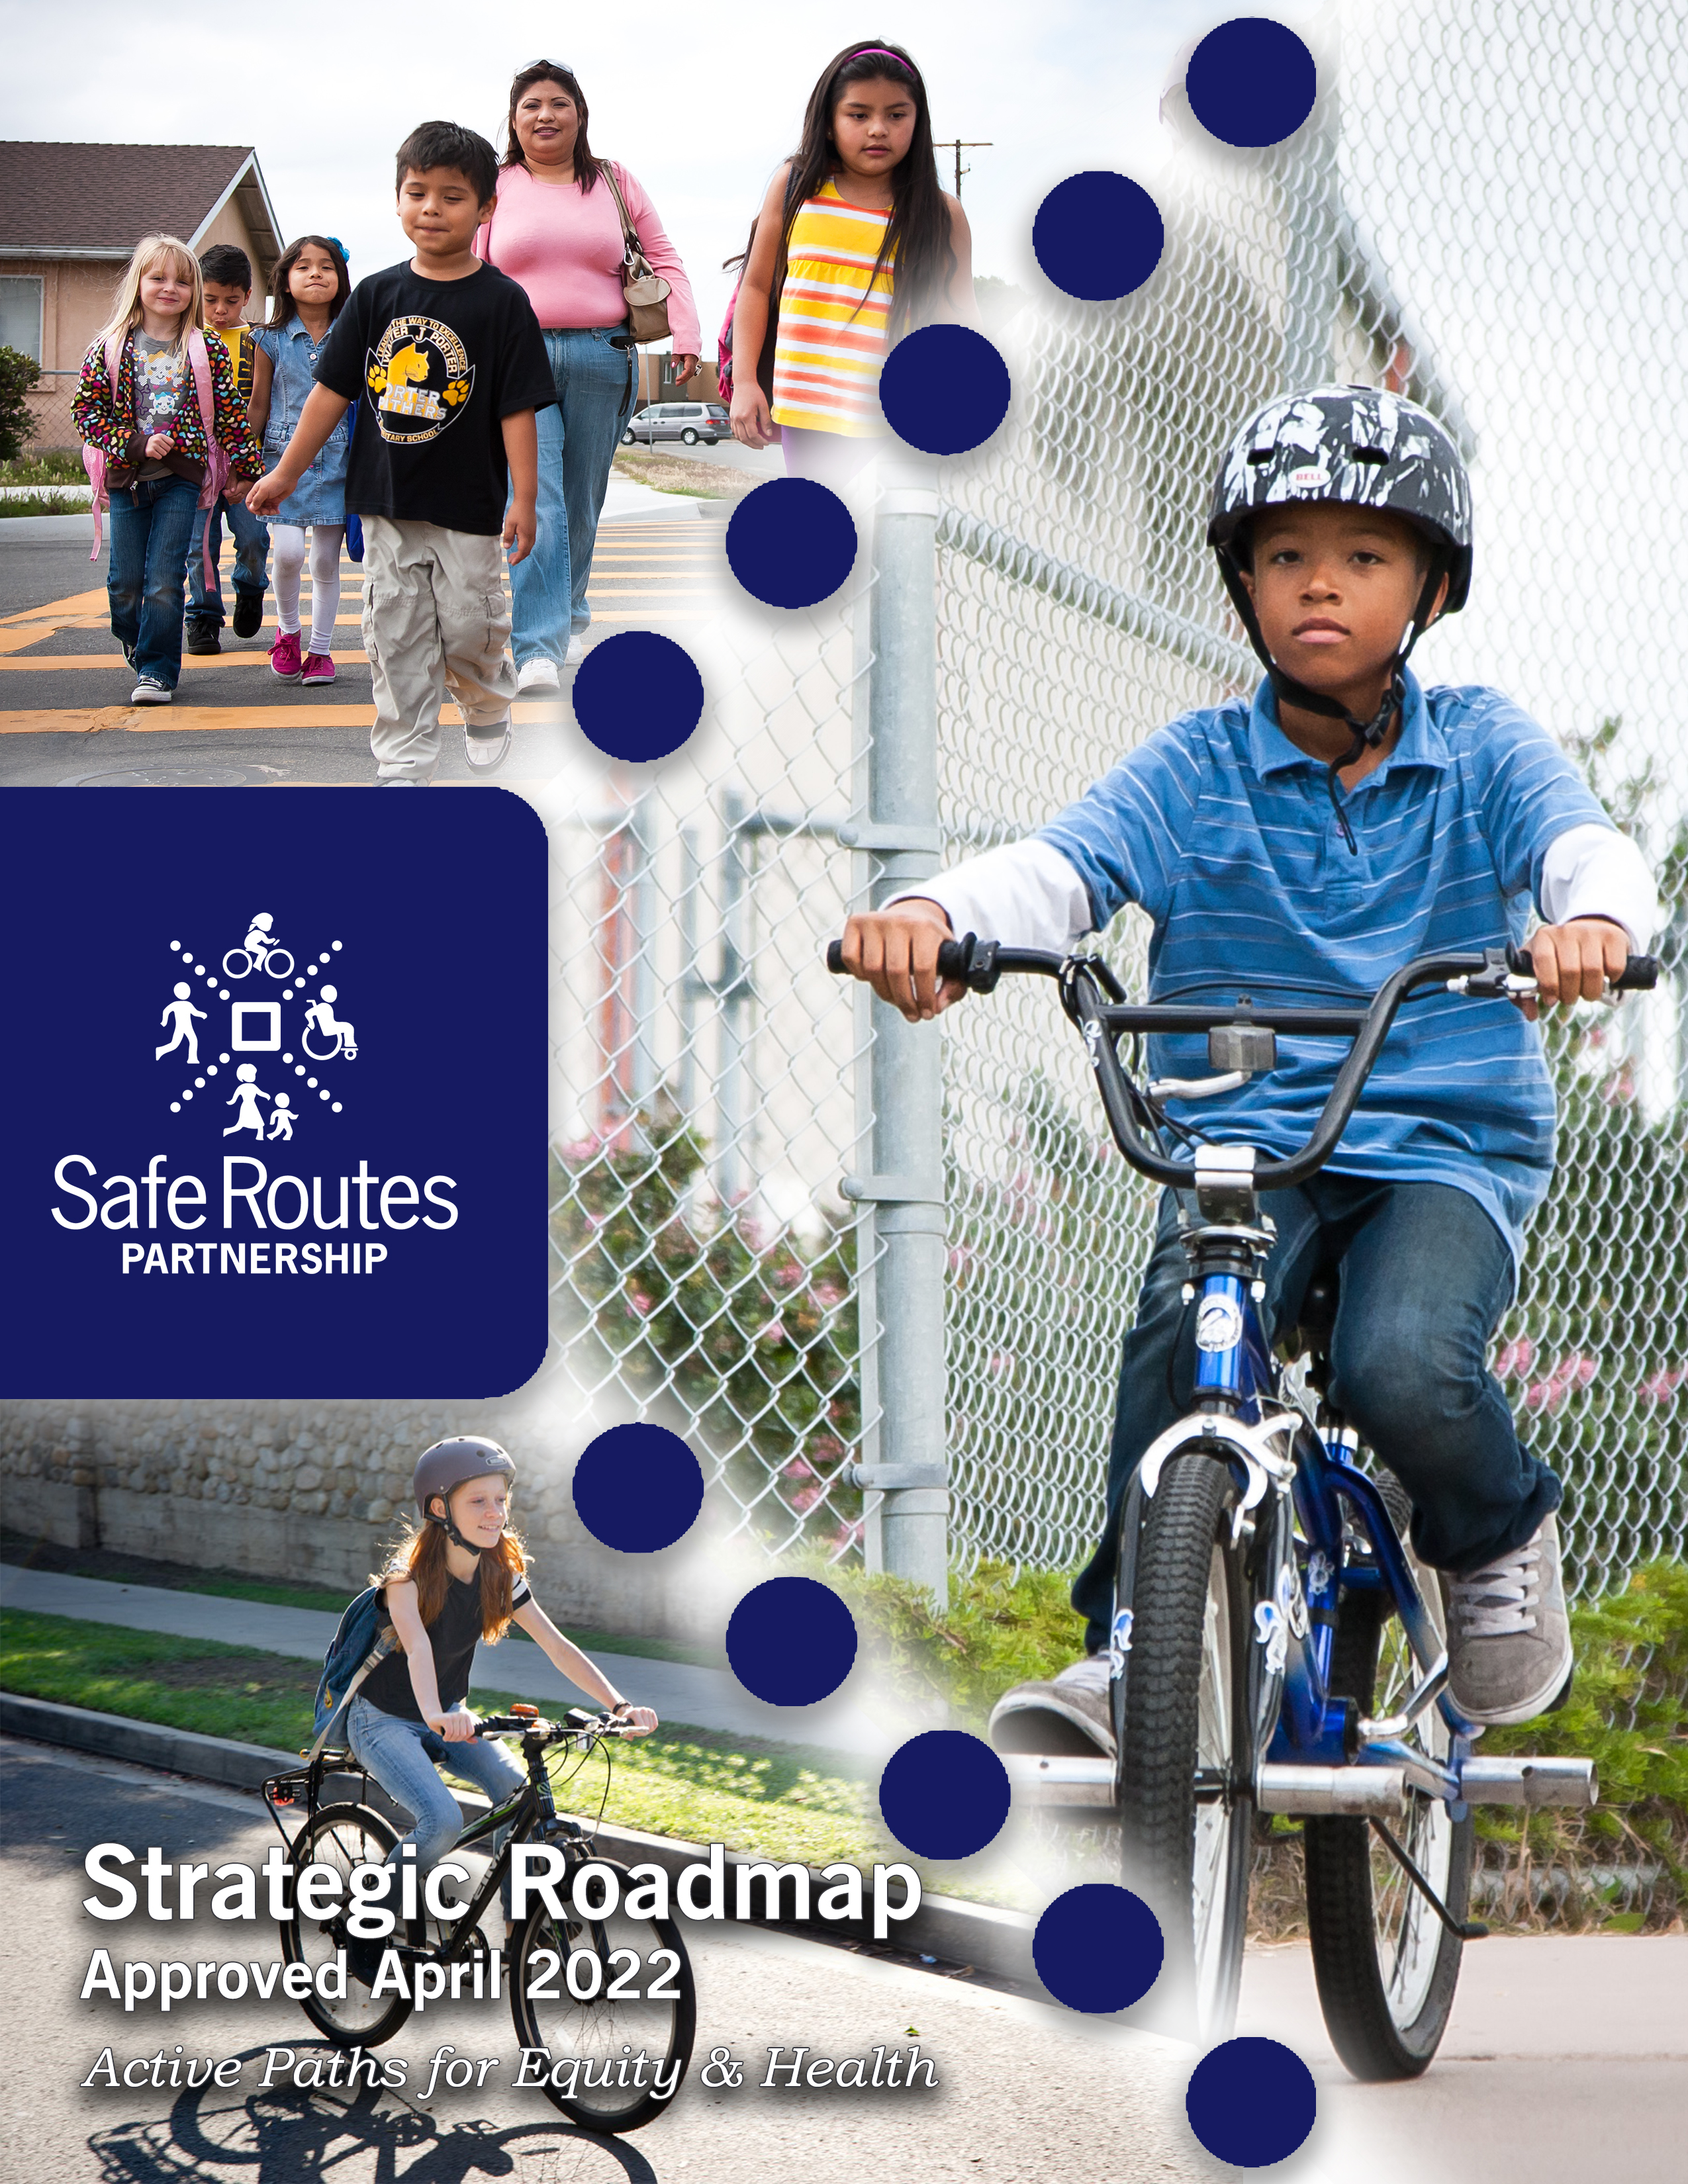 Strategic Roadmap Approved April 2022 images of kids walking and bicycling, and 